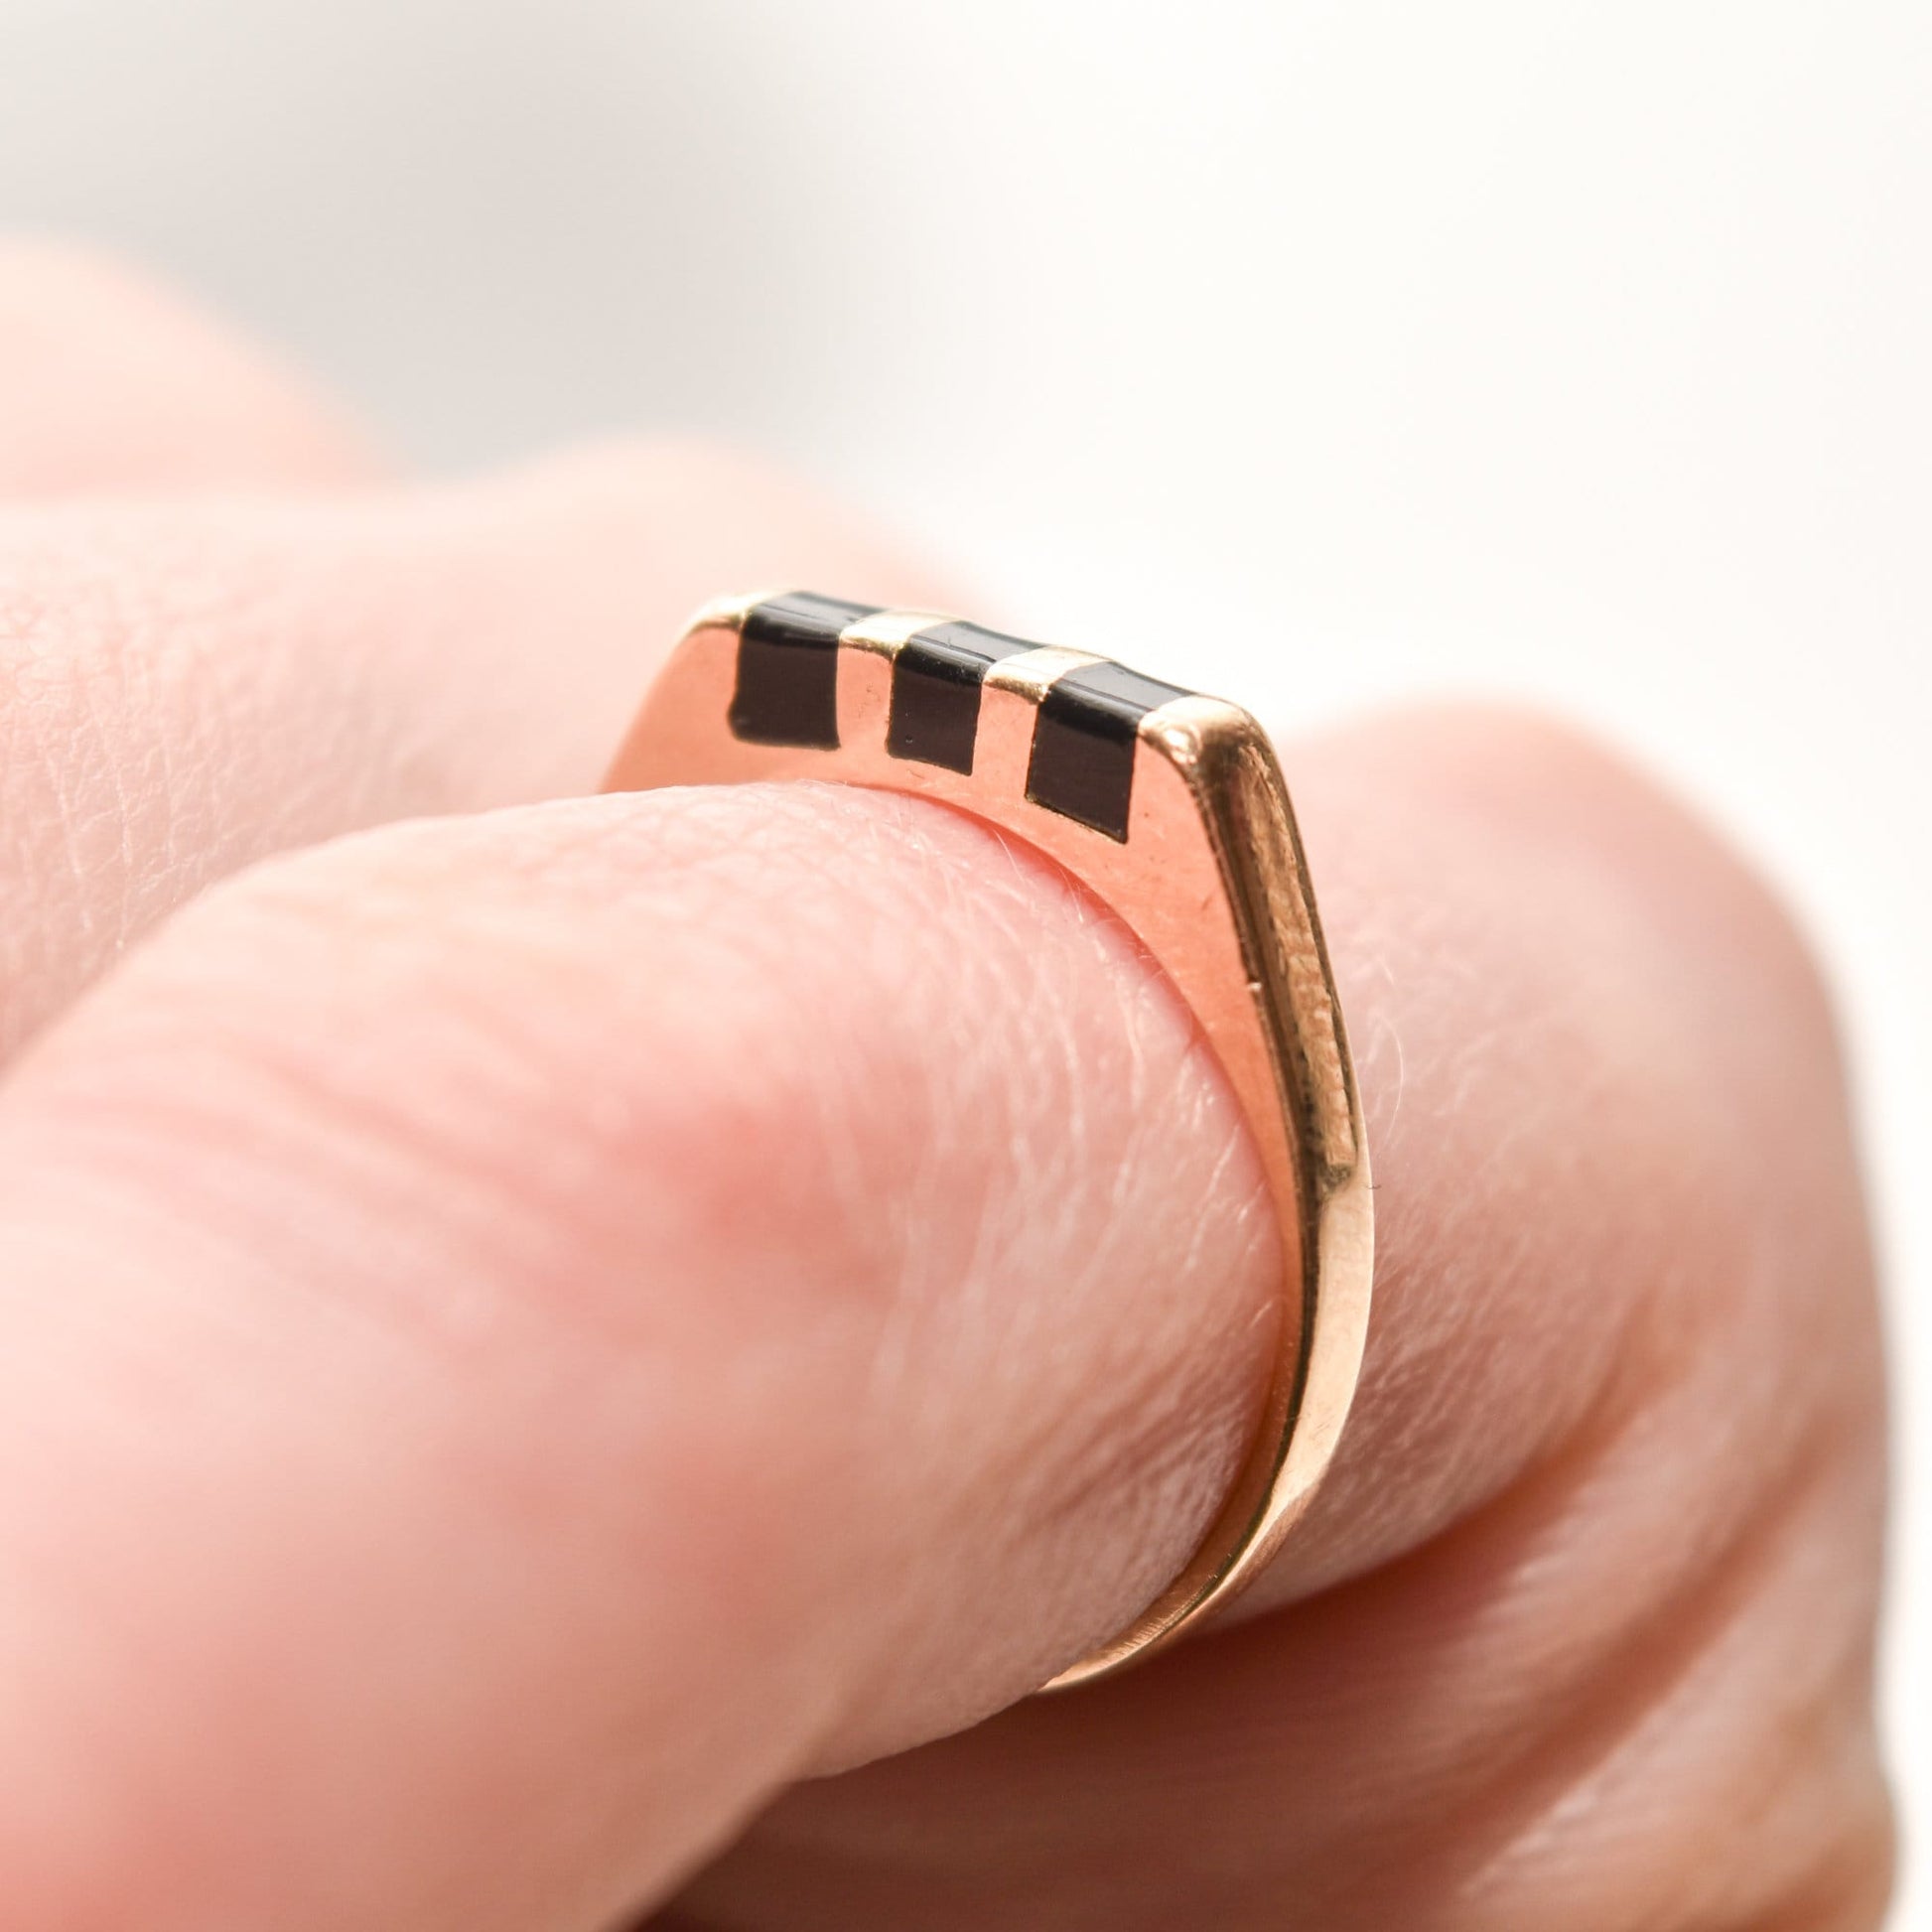 Minimalist 14K black onyx inlay ring on finger, striped yellow gold stacking ring, size 5.5 US, close-up view.